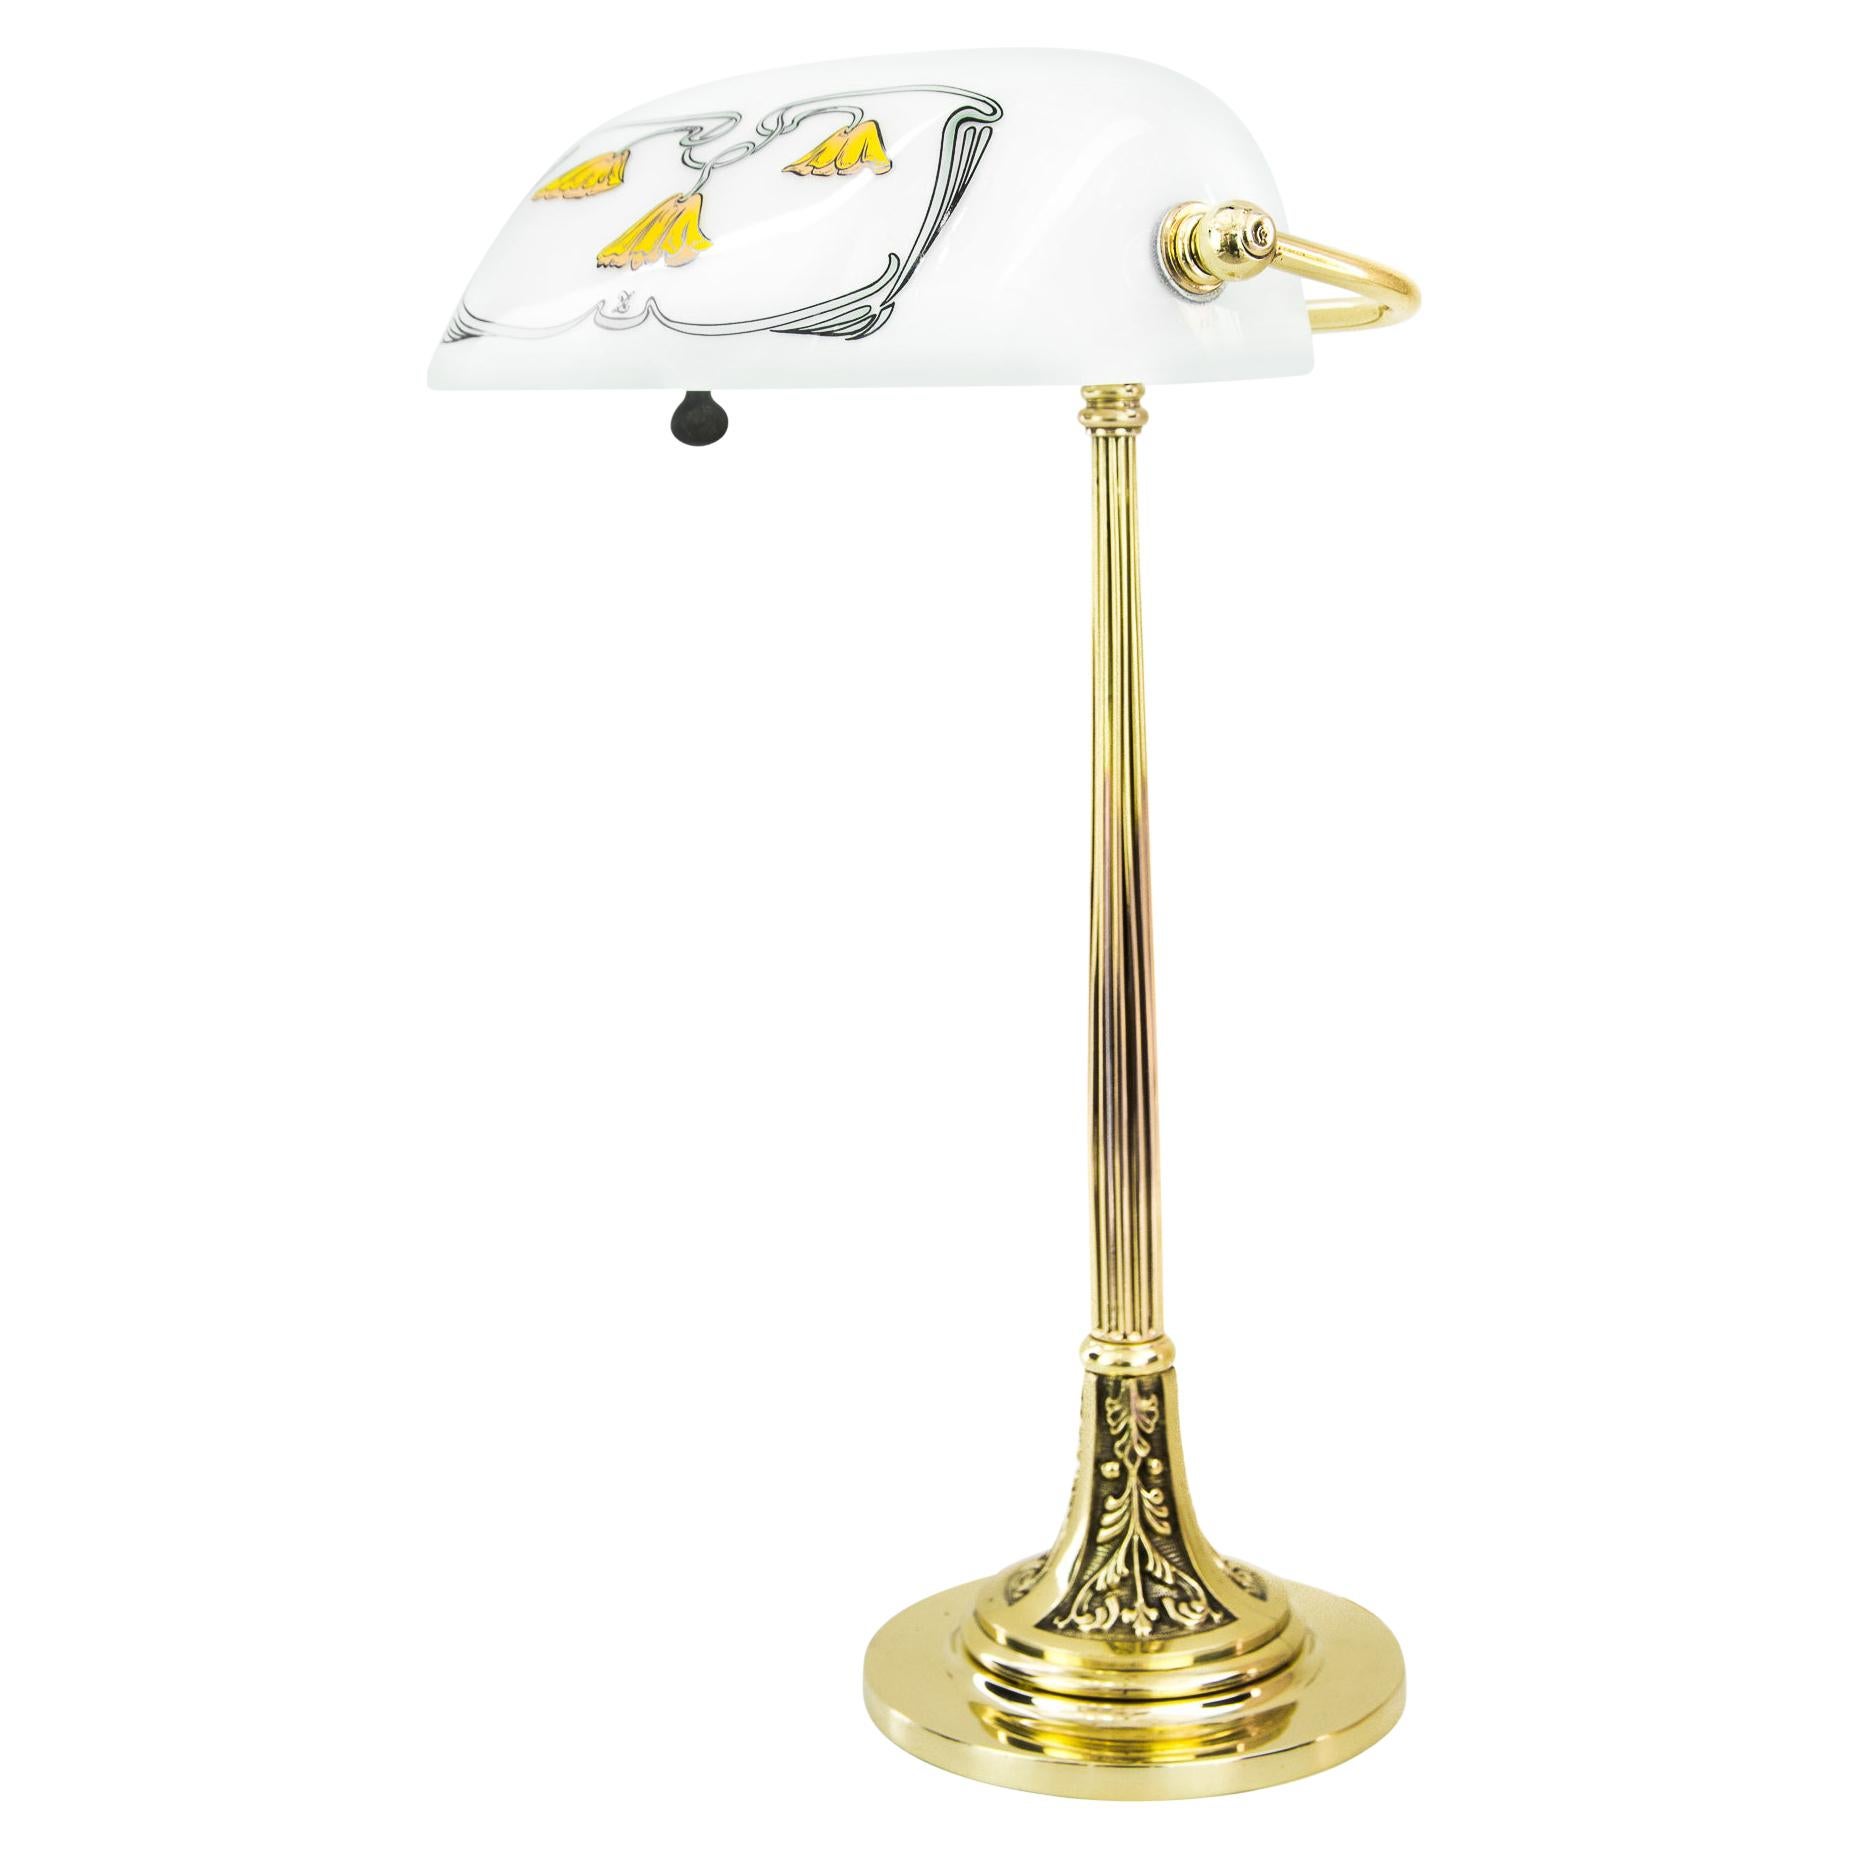 Jugendstil Table Lamp with New Glass Shade, Vienna, circa 1908 For Sale